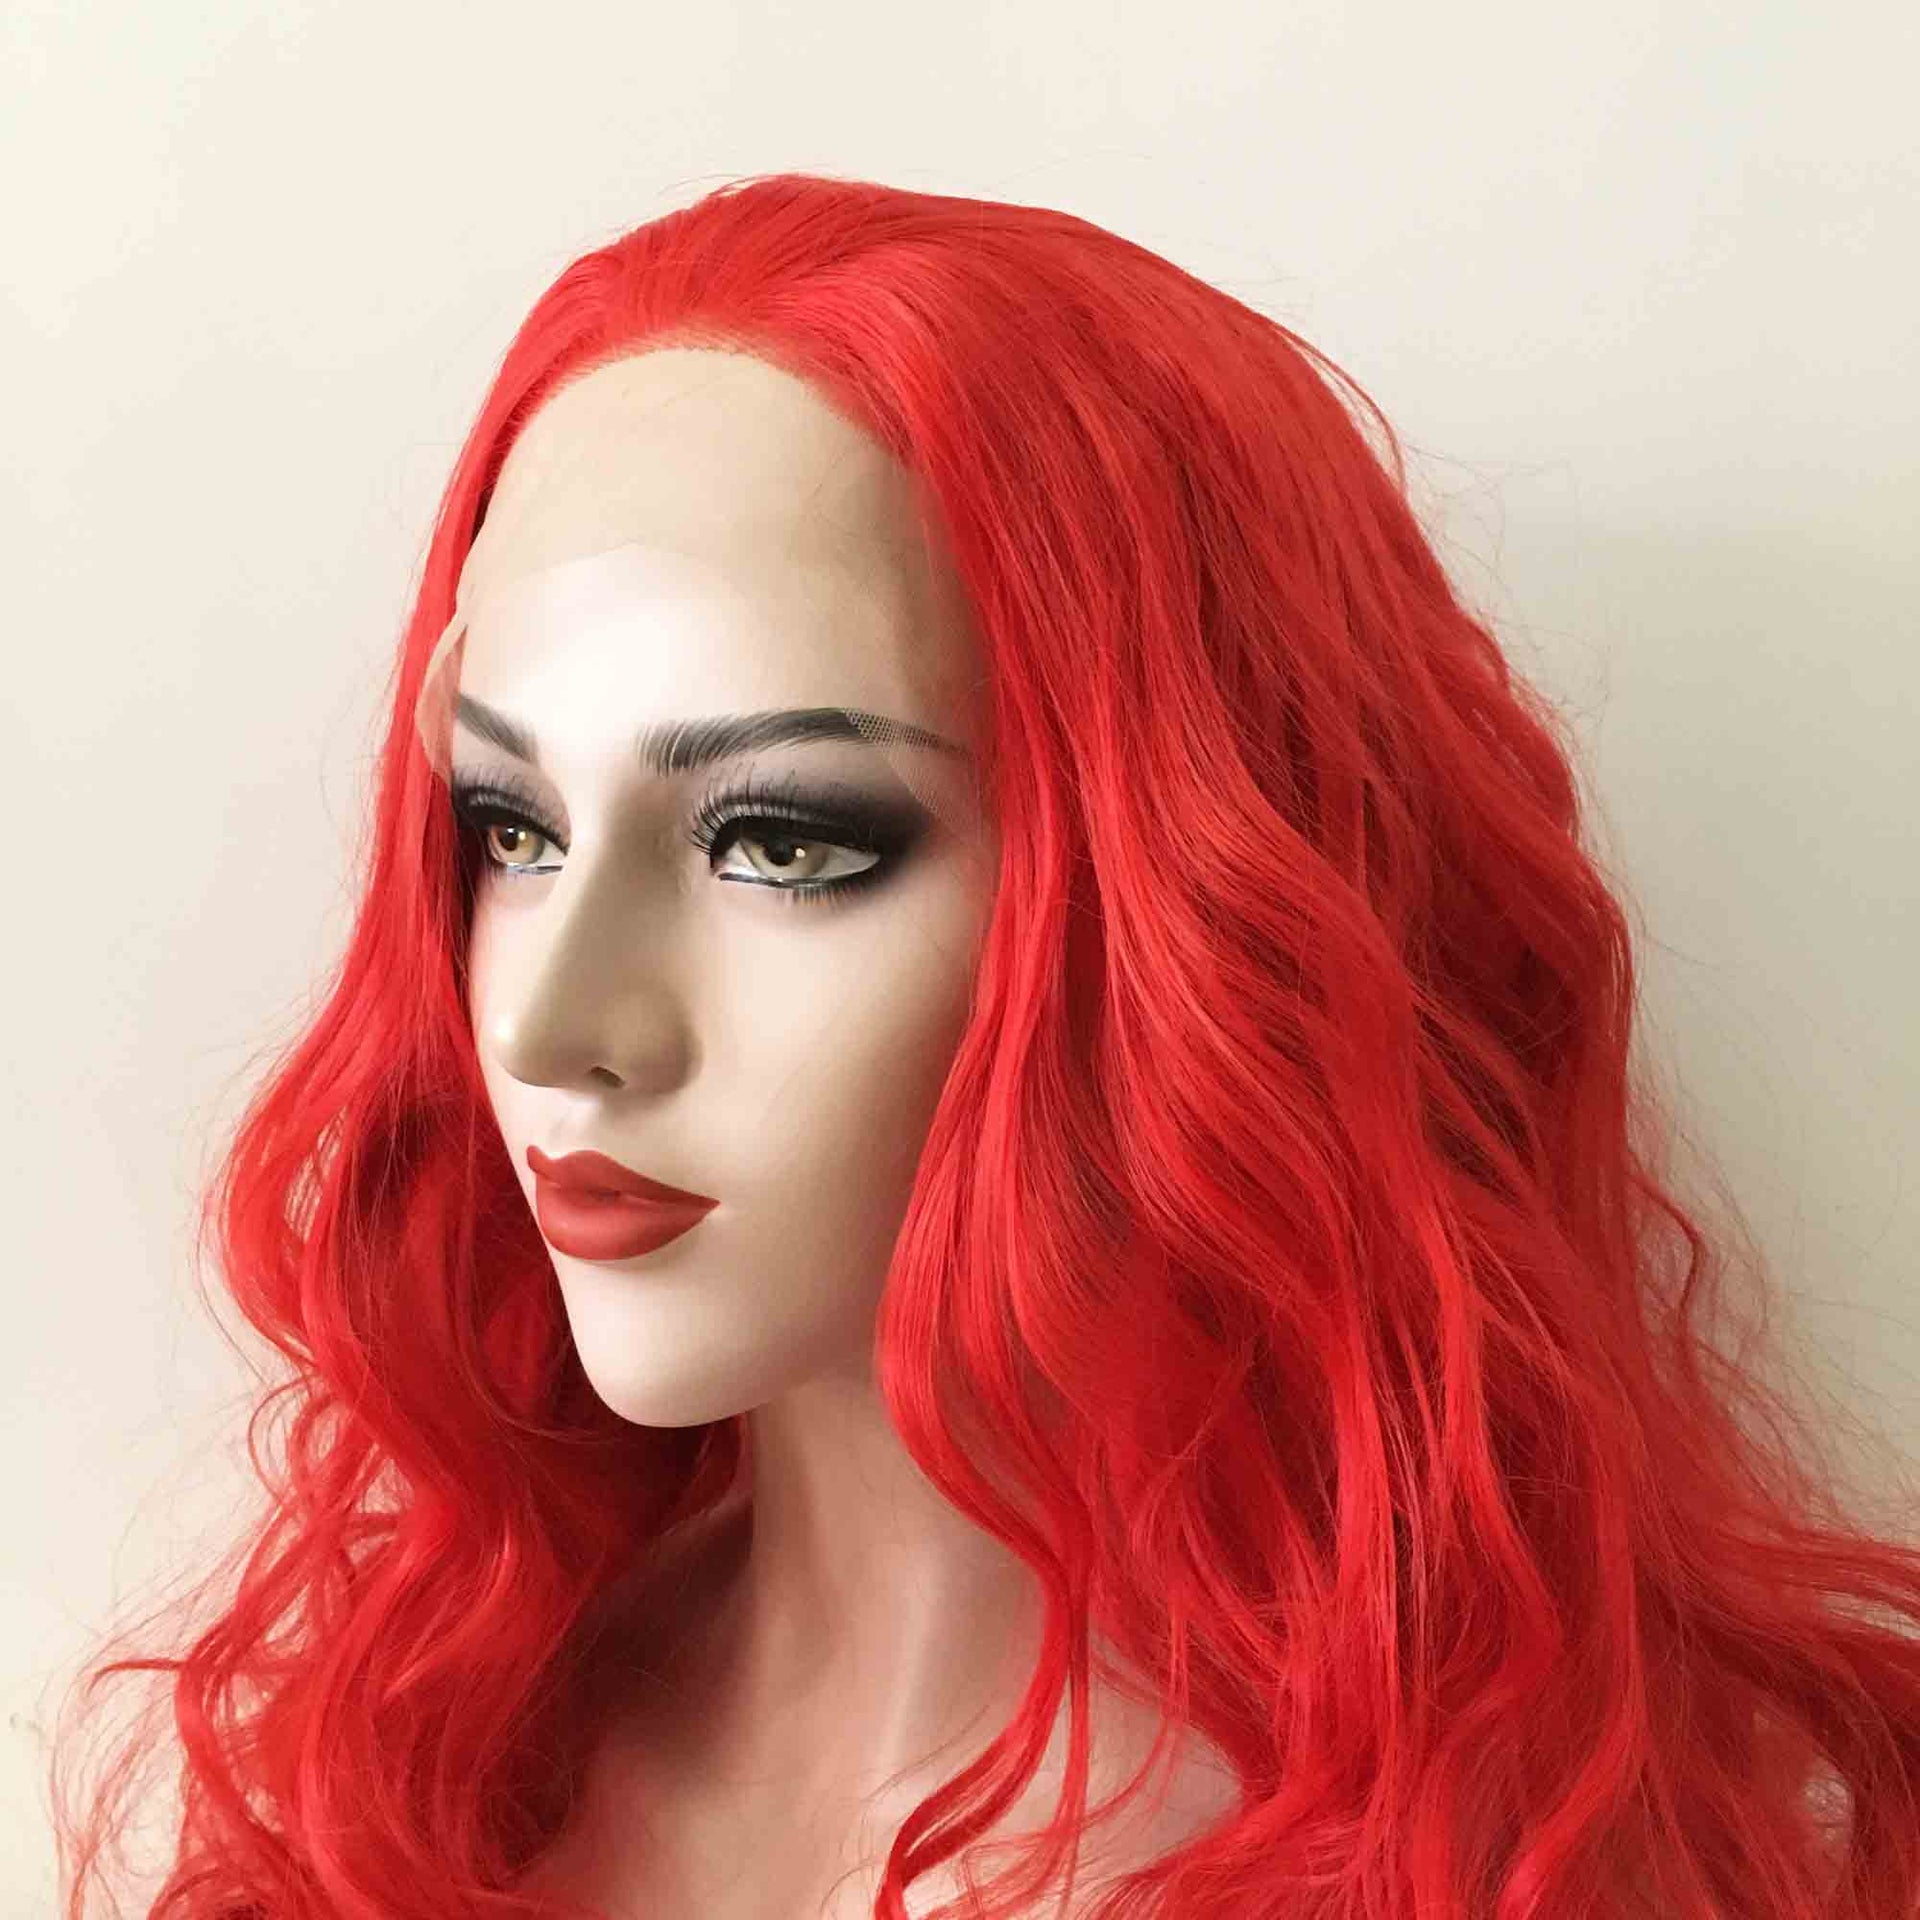 nevermindyrhead Women Lace Front Red Free Part Big Waves Curly Long Hair Costume Wig